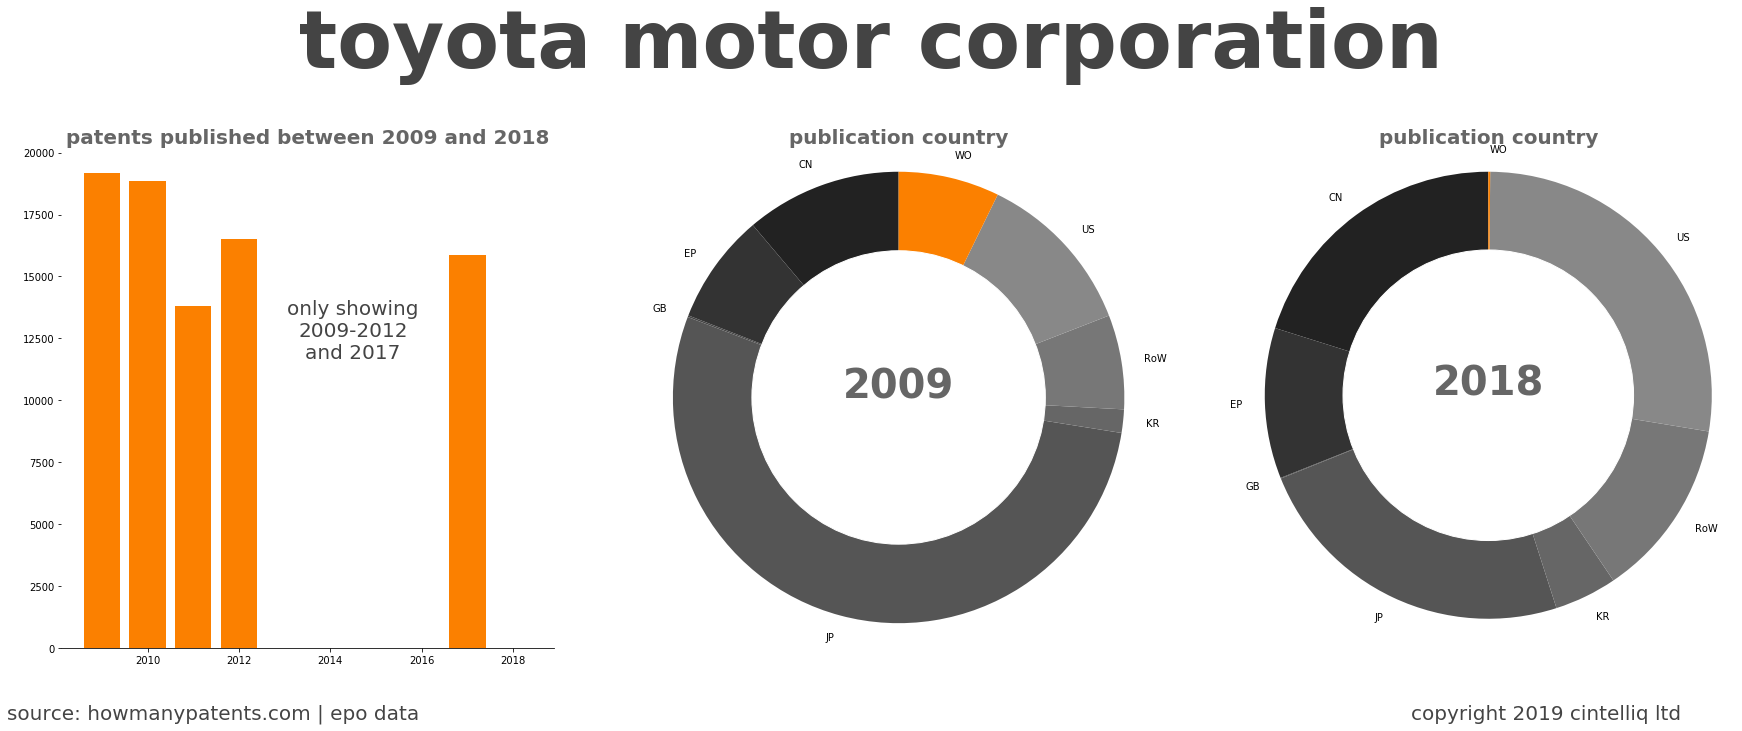 summary of patents for Toyota Motor Corporation